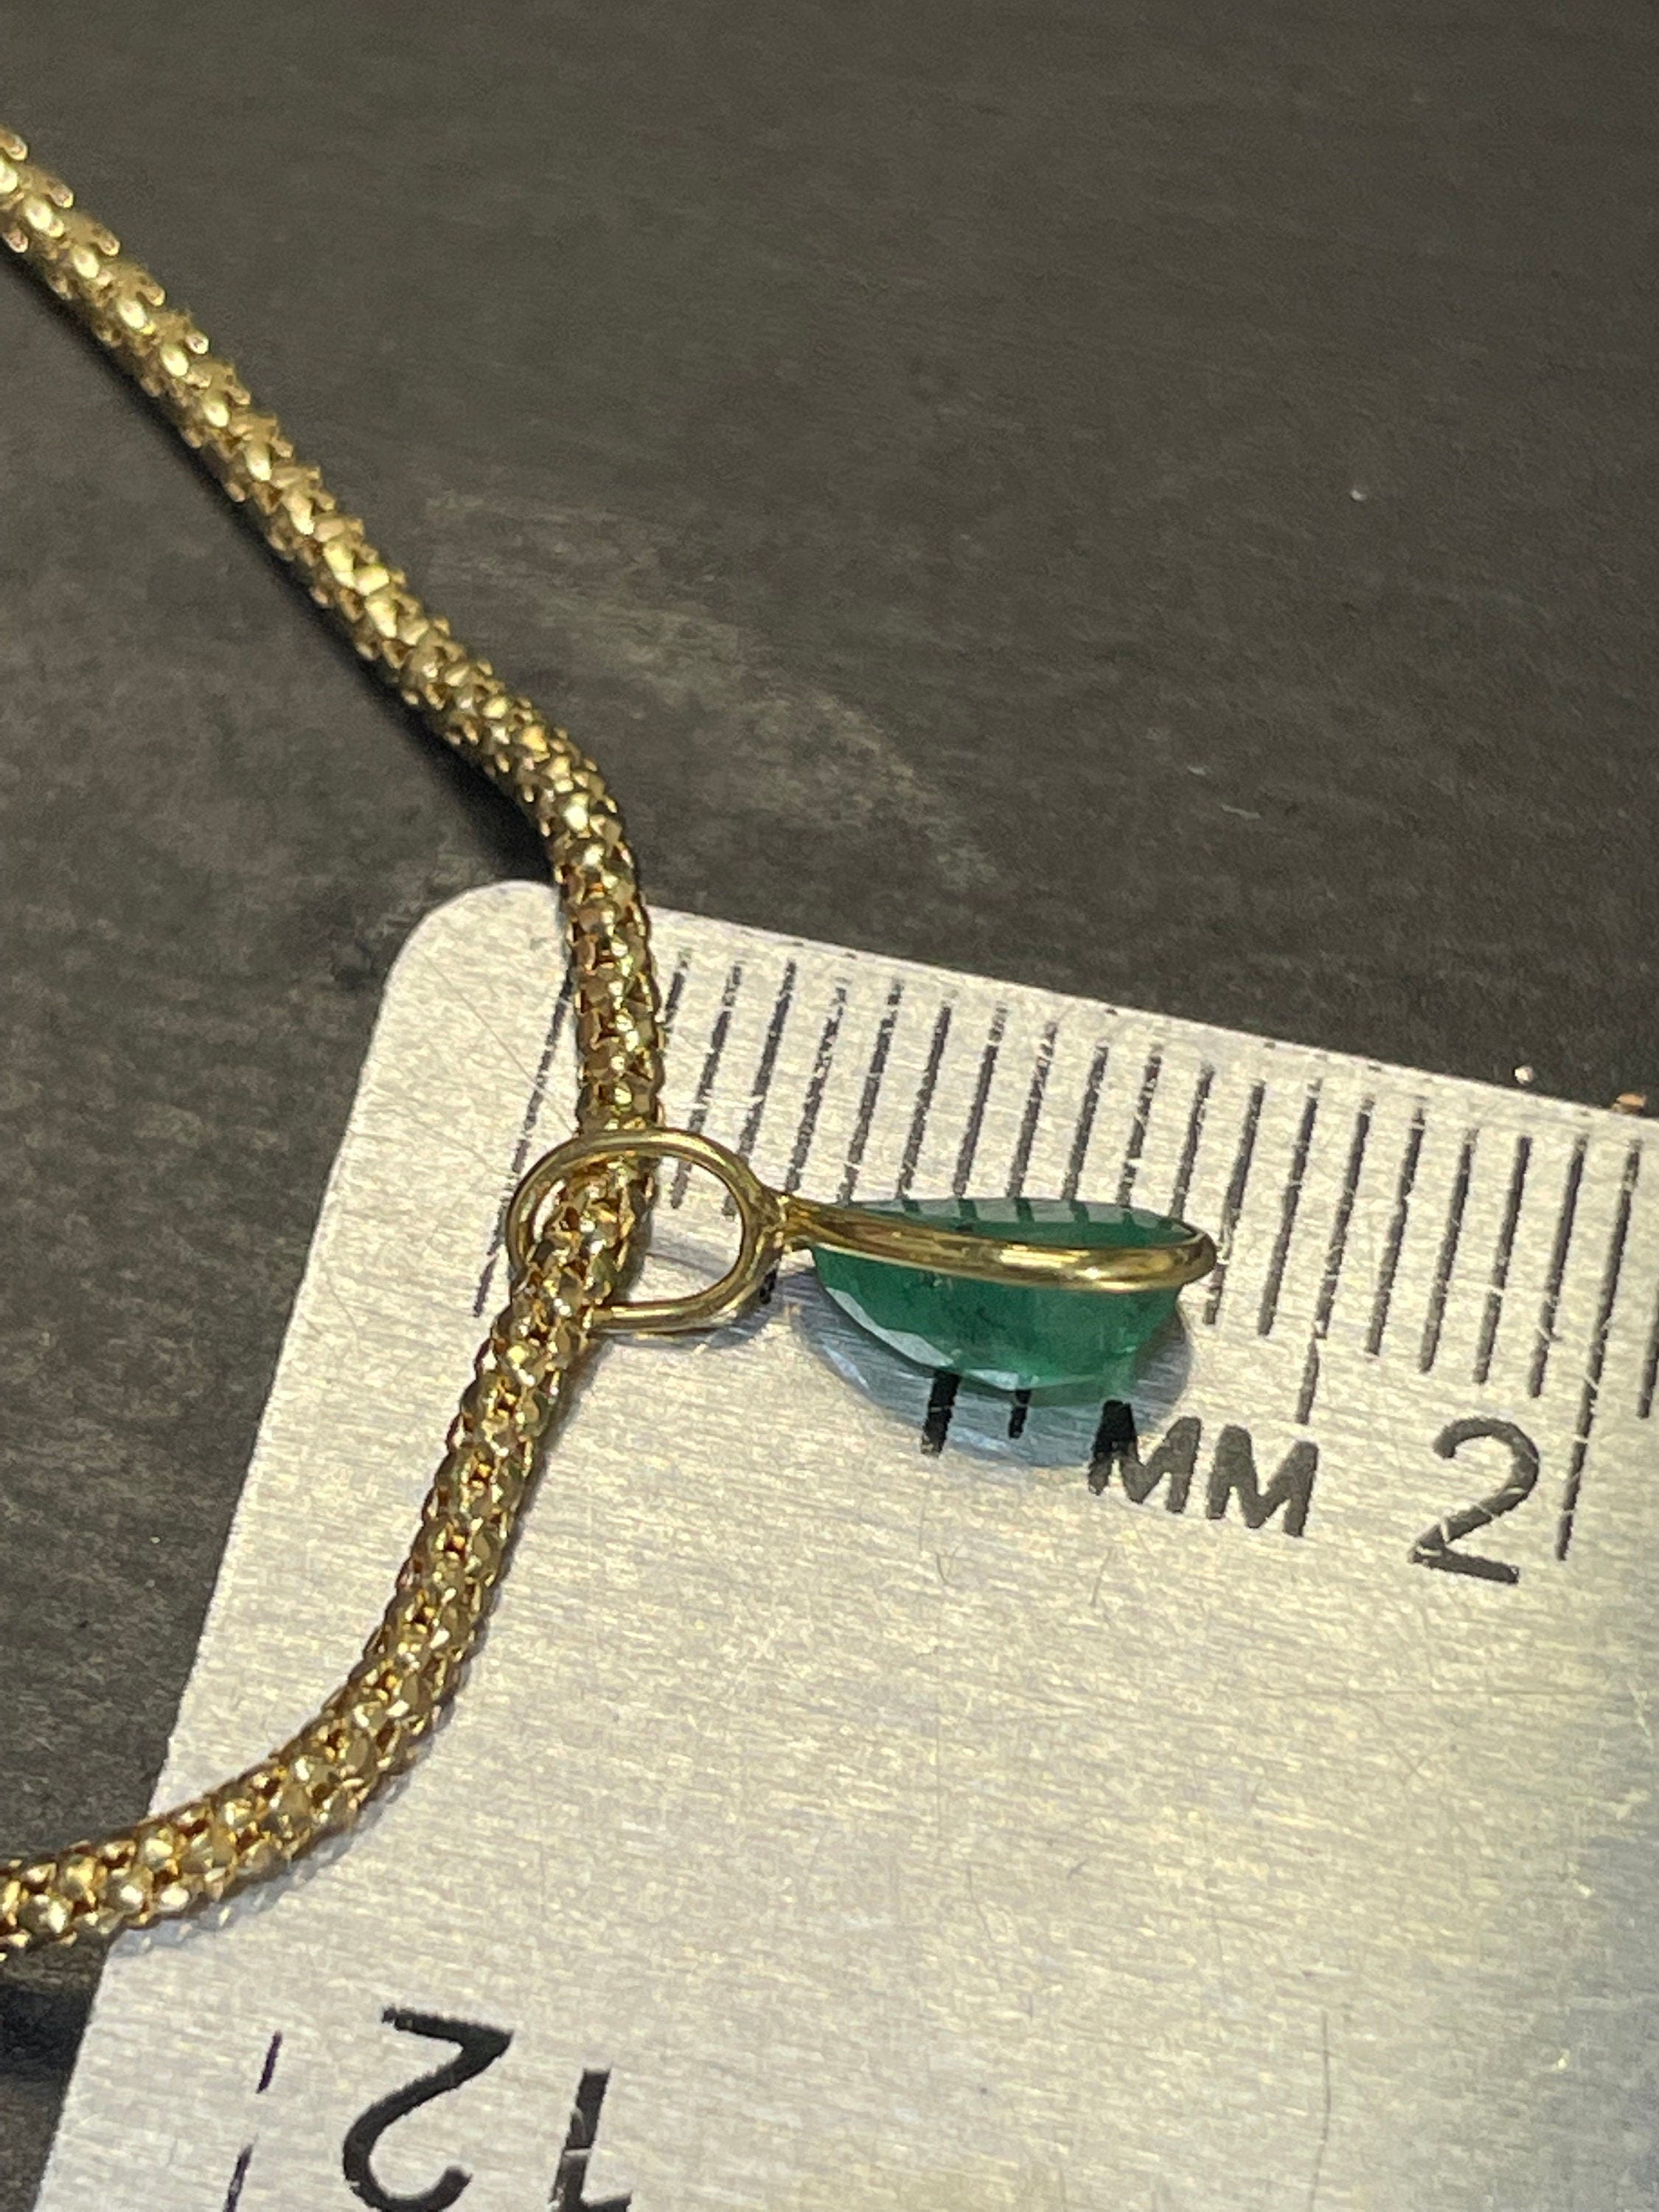 Shimmering! .67CT Natural Colombian Emerald 14K Yellow Gold Bezeled Charm Pendant OOAK 11x4mm